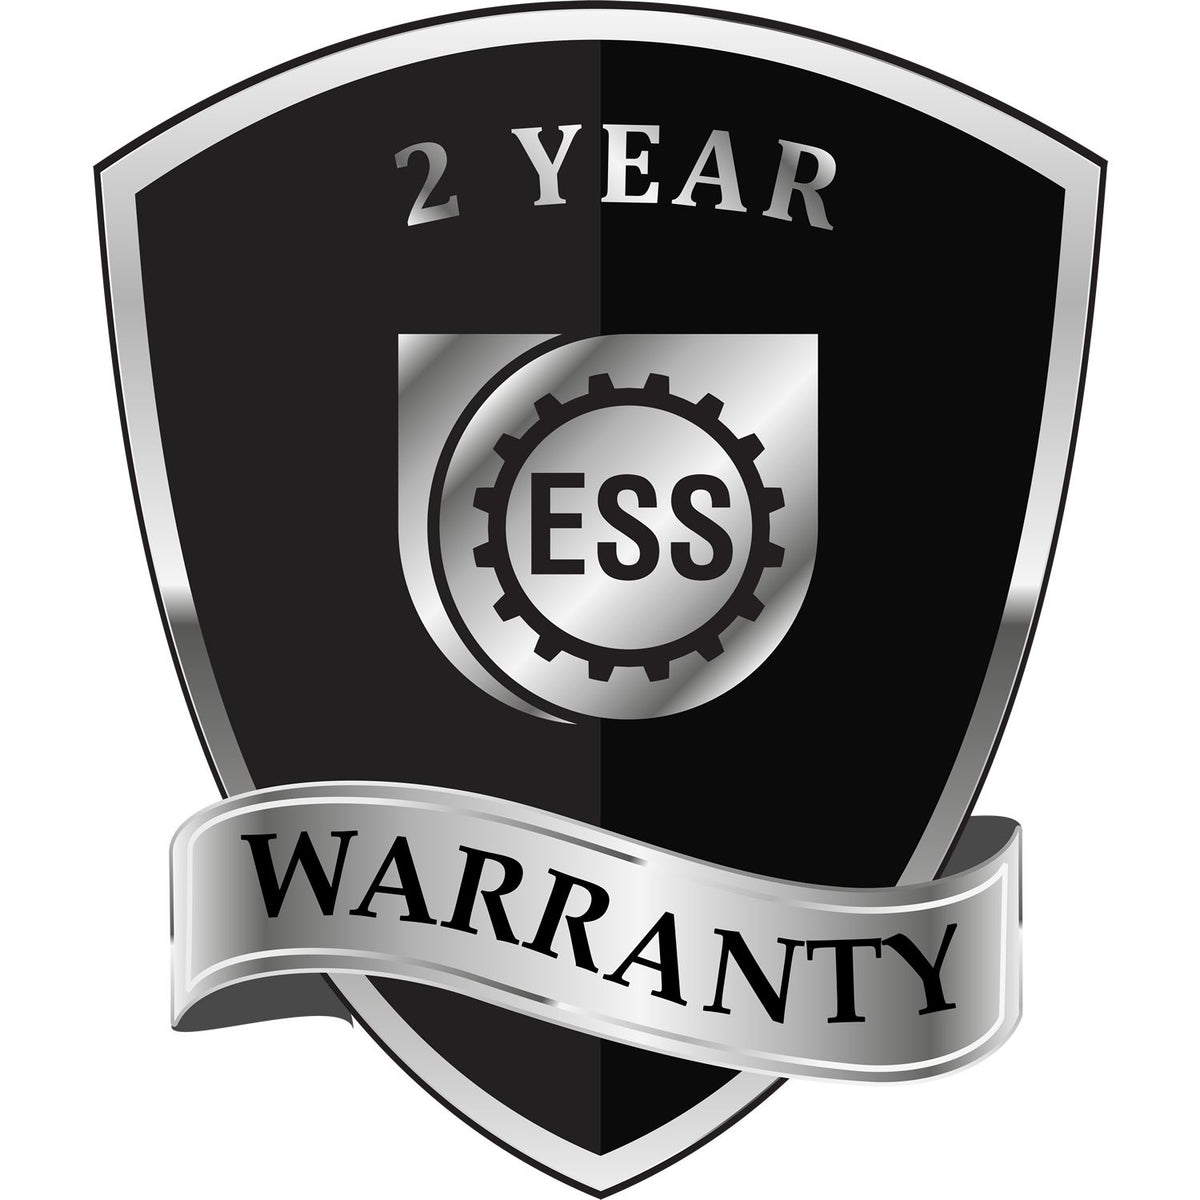 A badge or emblem showing a warranty icon for the Long Reach Mississippi PE Seal